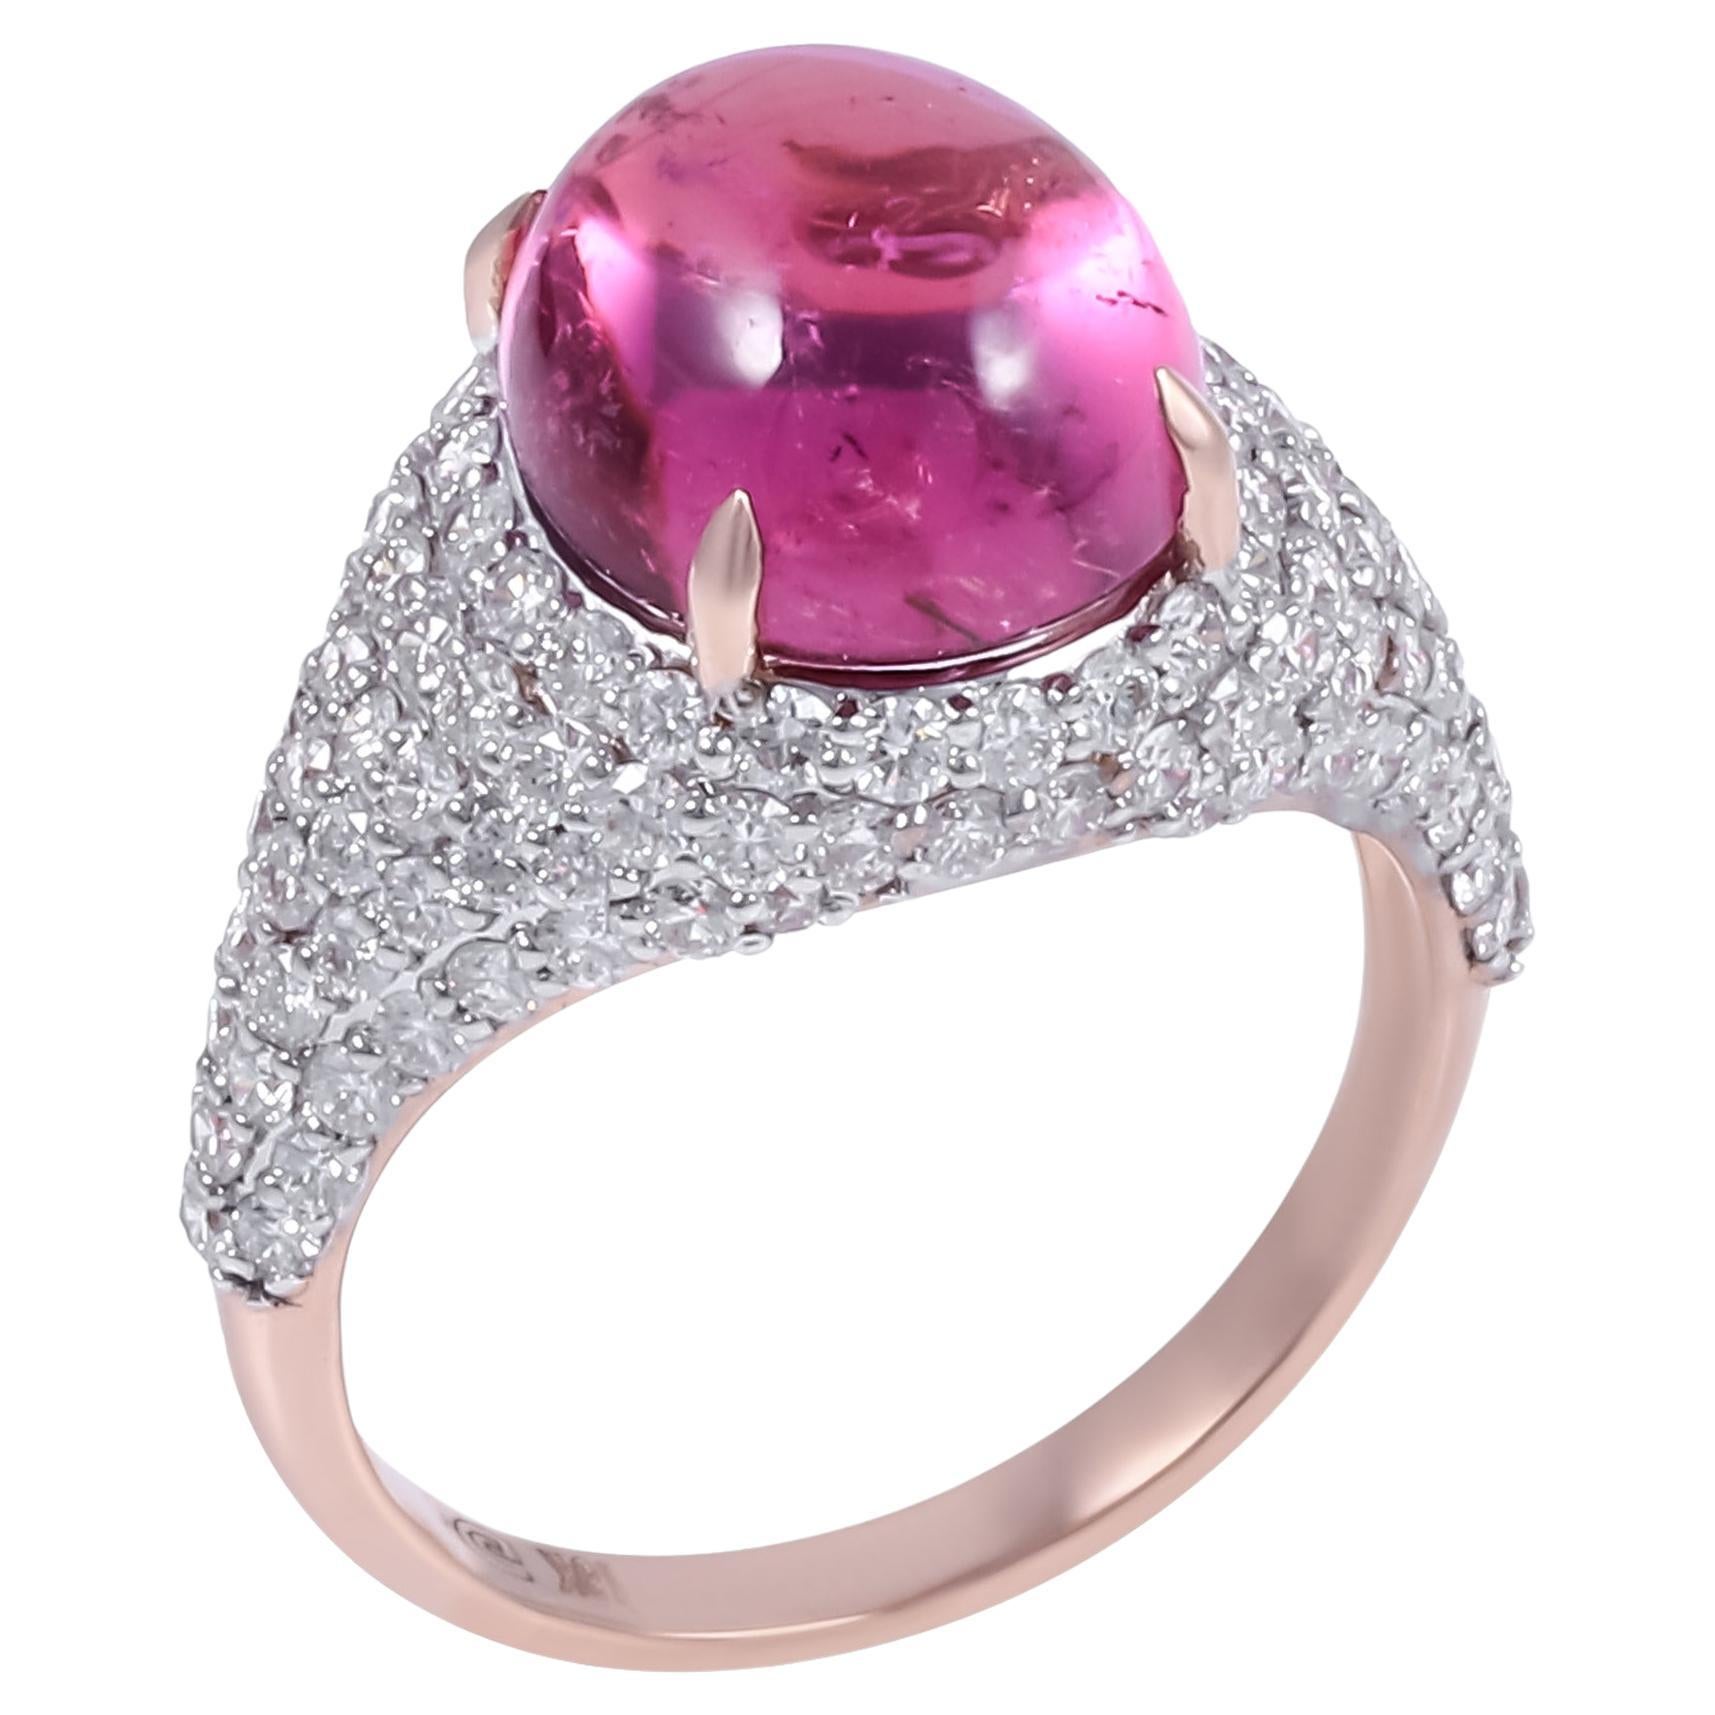 Pink Tourmaline Ring 6.55 Carat with Diamonds on the side band For Sale